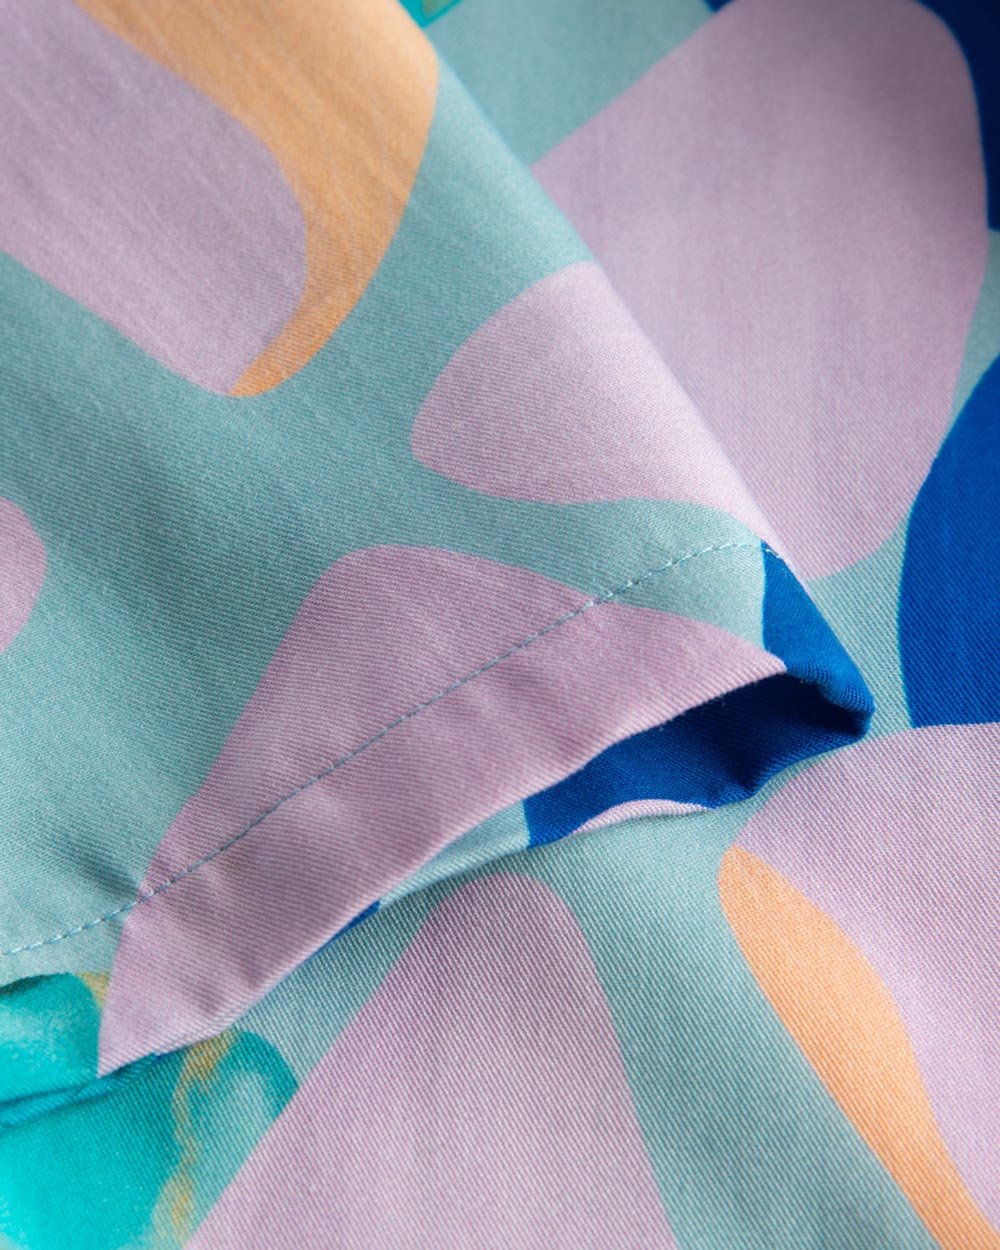 Close up view on stitchings on a short-sleeved vacation shirt with a multi-colored graphic patter